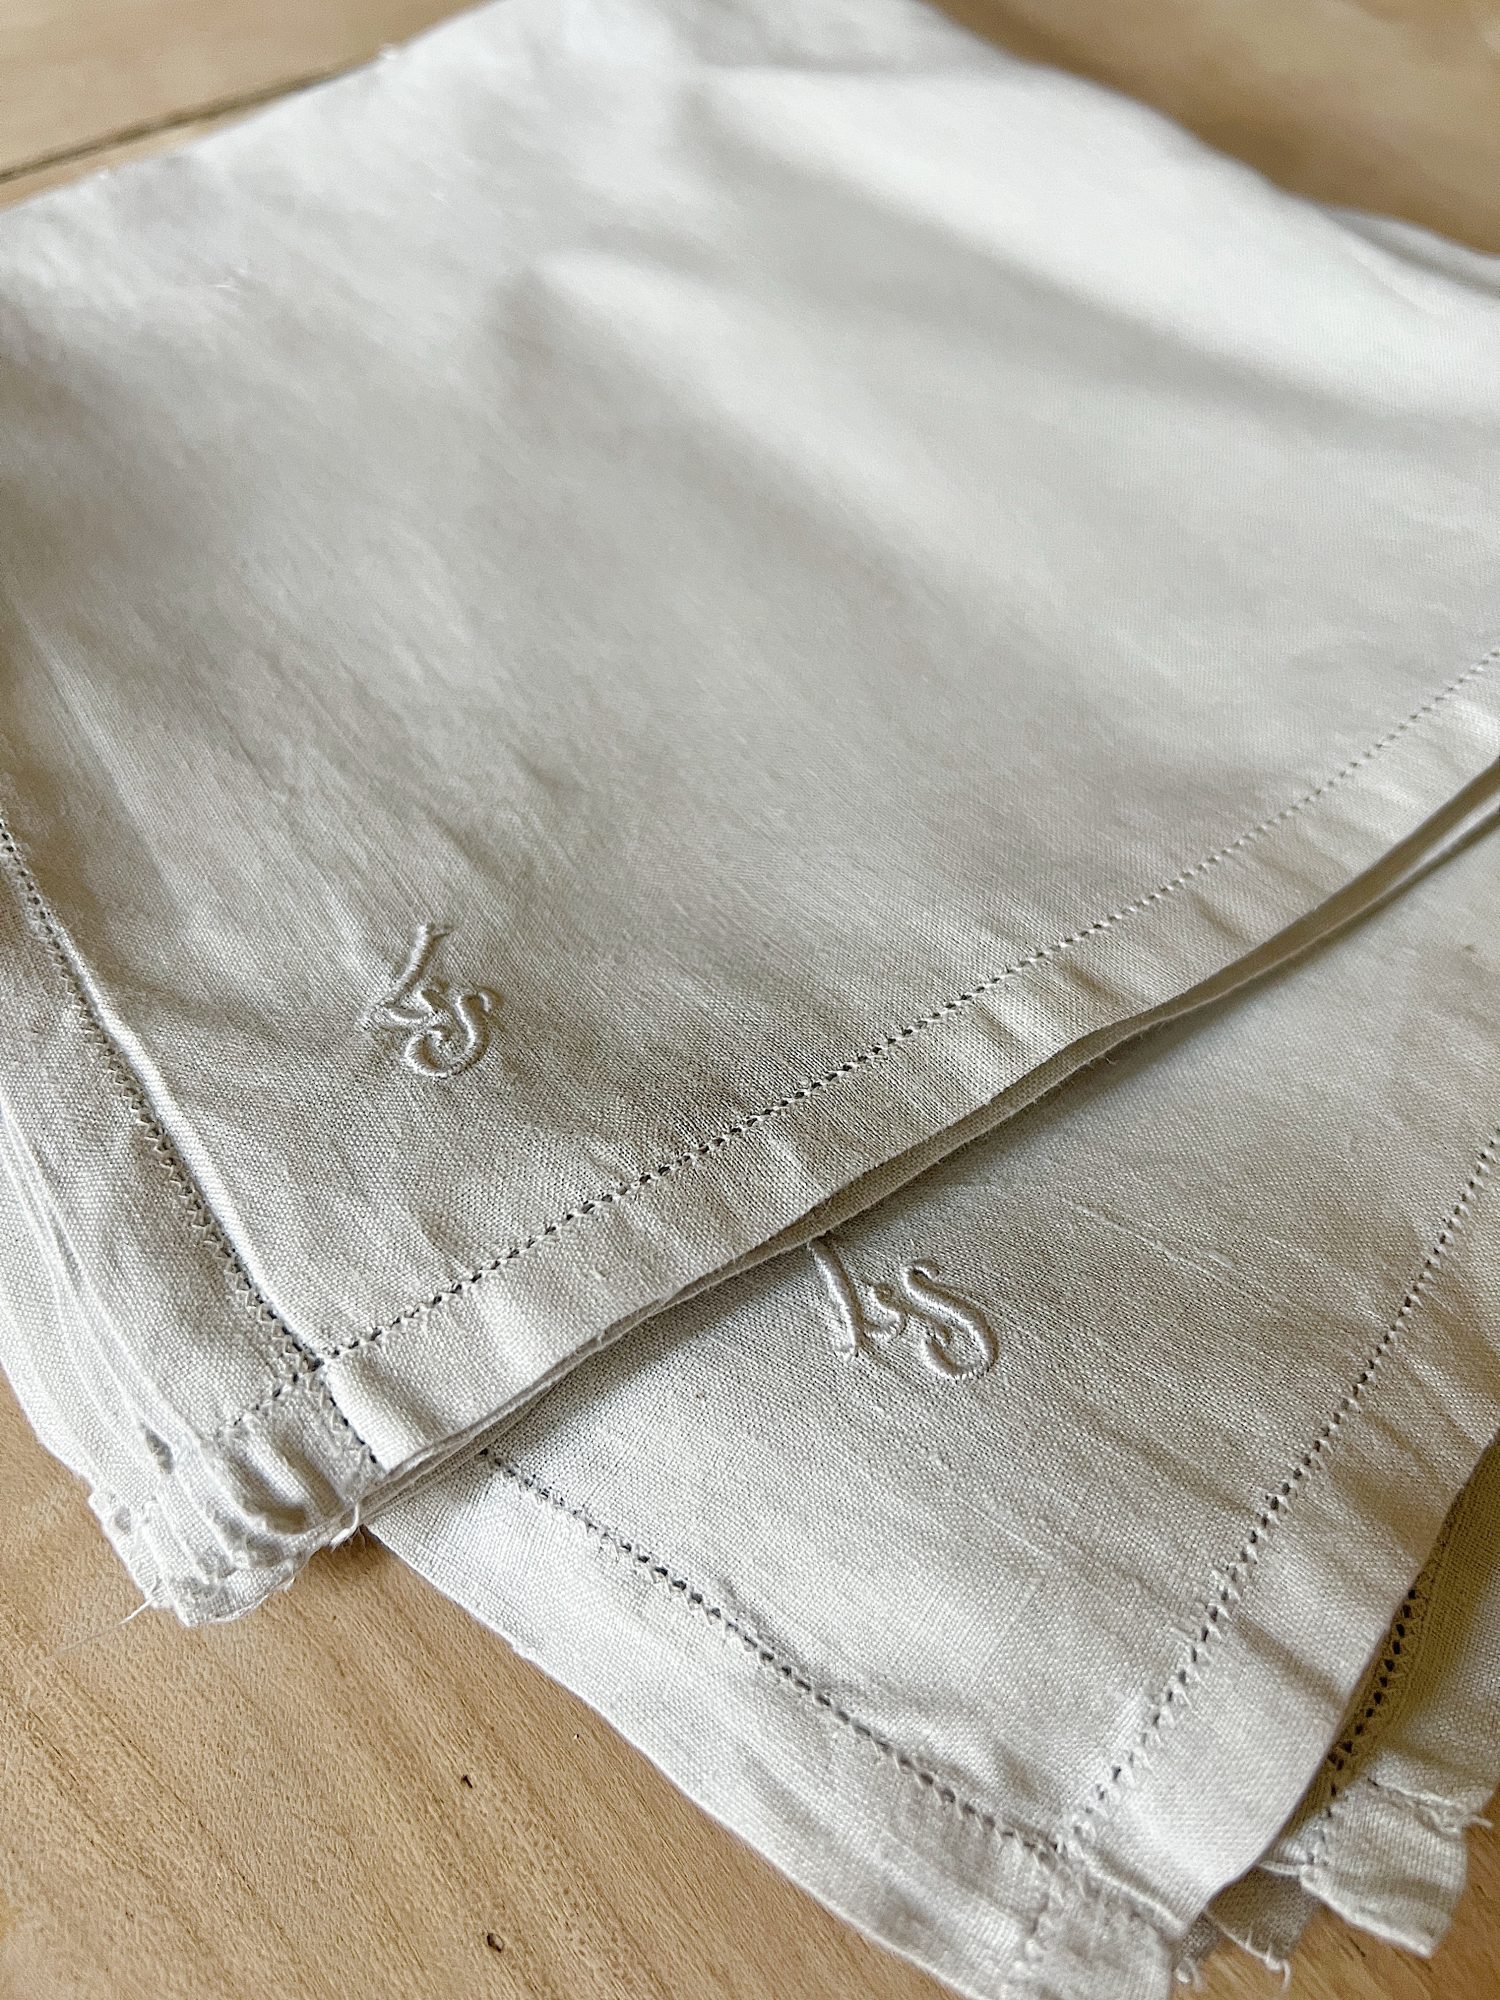 Linen Napkins with Inititals